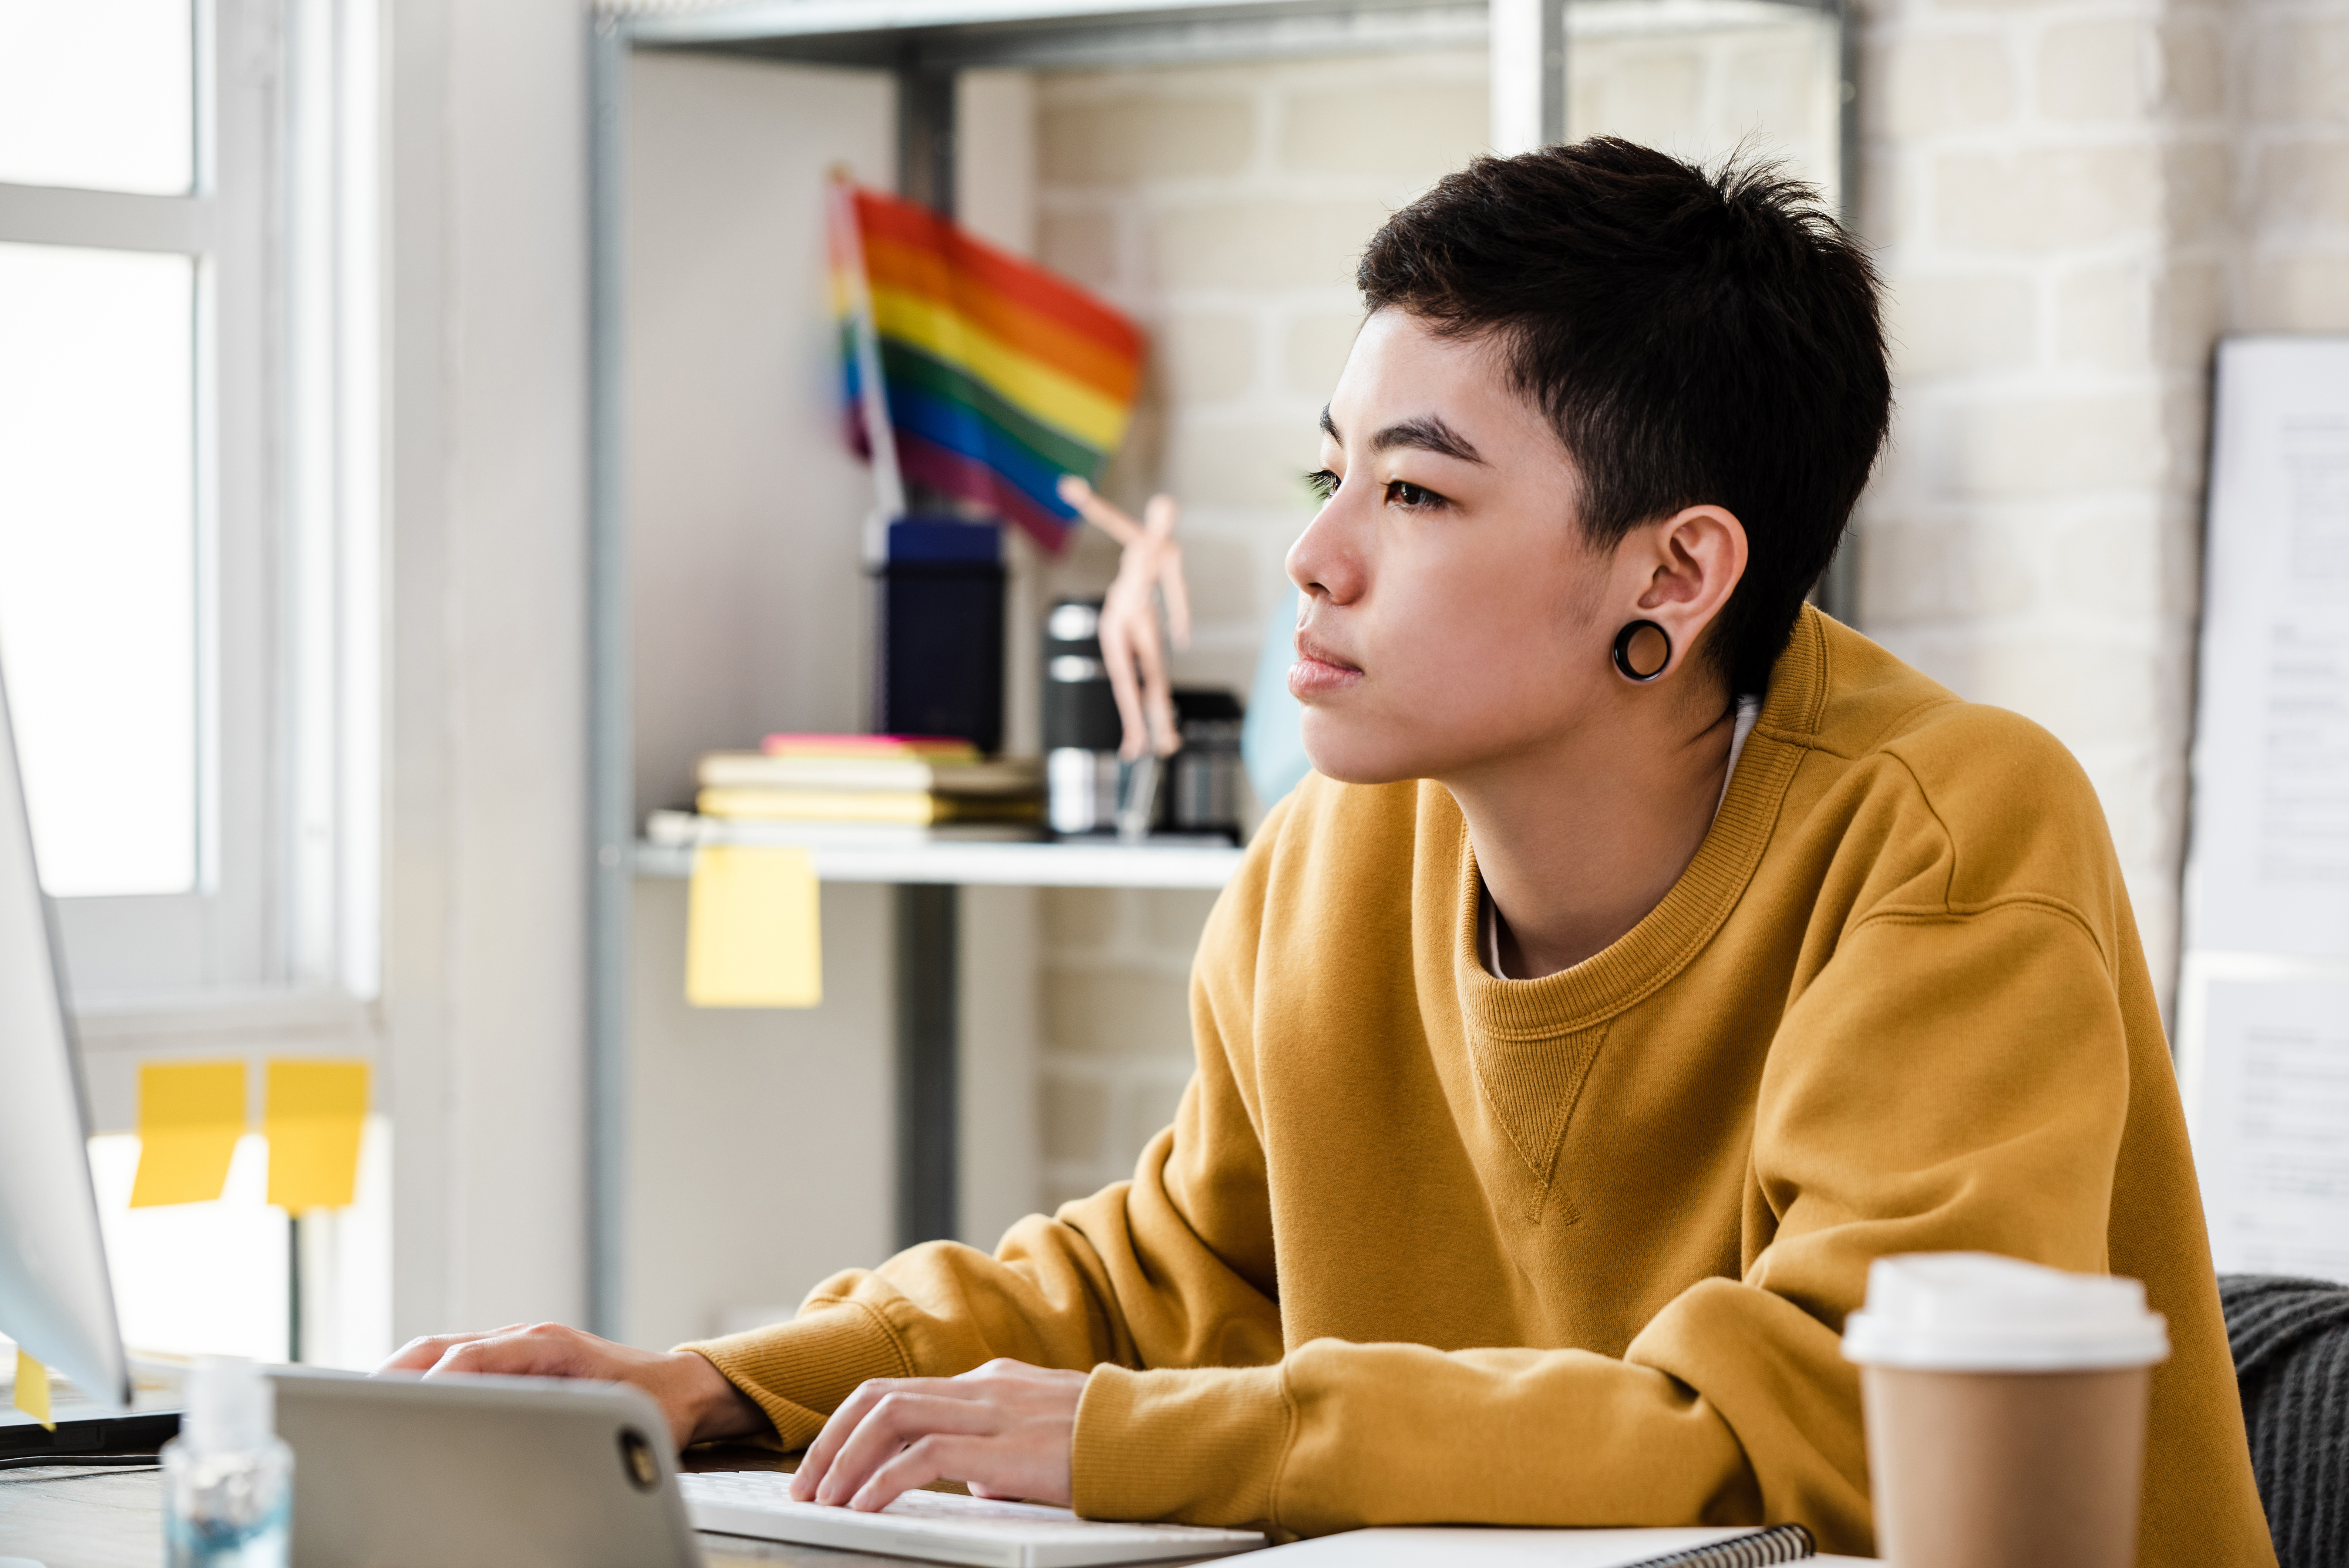 person working on their computer with a pride flag on the shelf behind them